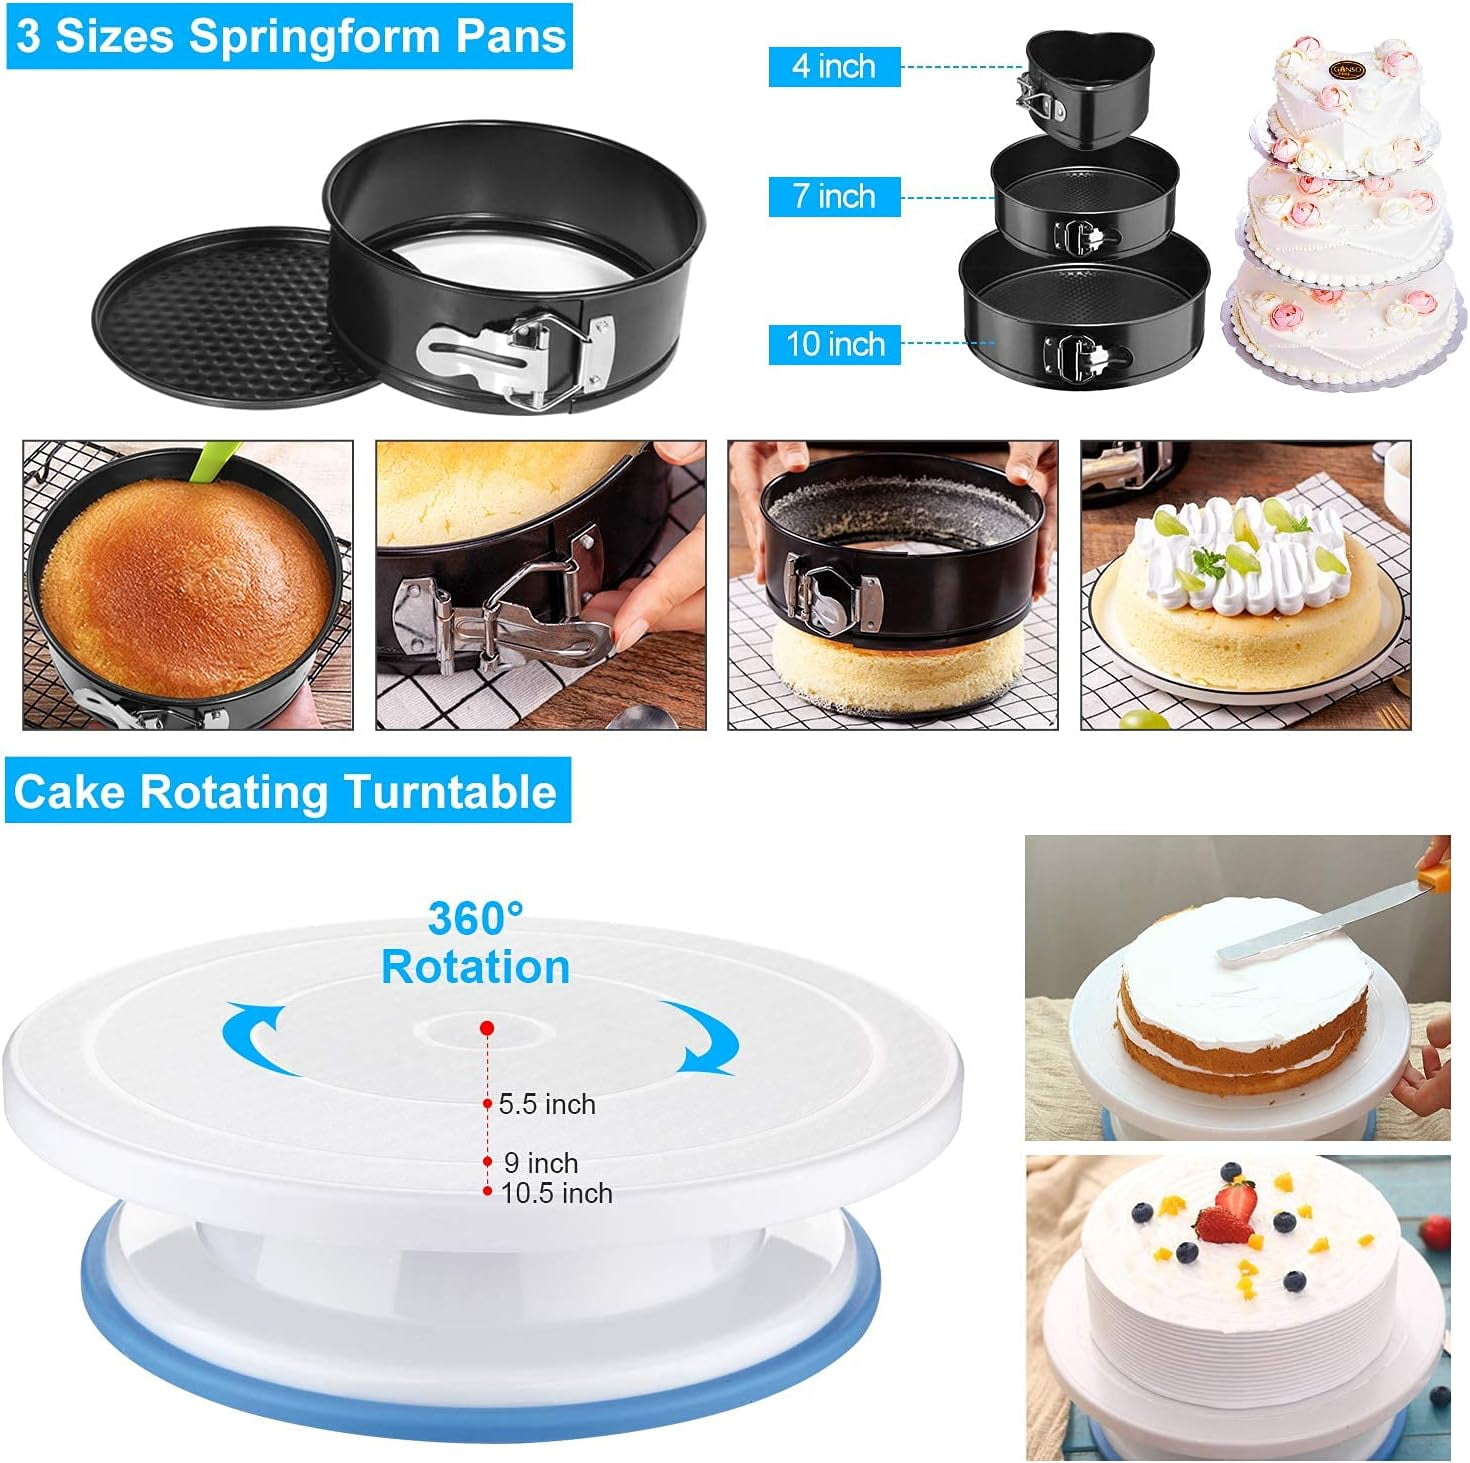 Cake Decorating Supplies, 507 PCS Cake Decorating Kit 3 Packs Spring form Cake  Pans, Cake Rotating Turntable, 48 Piping Icing Tips, 7 Russian Nozzles,  Chocolate Mold Baking, Mother's Day Gift Ideas